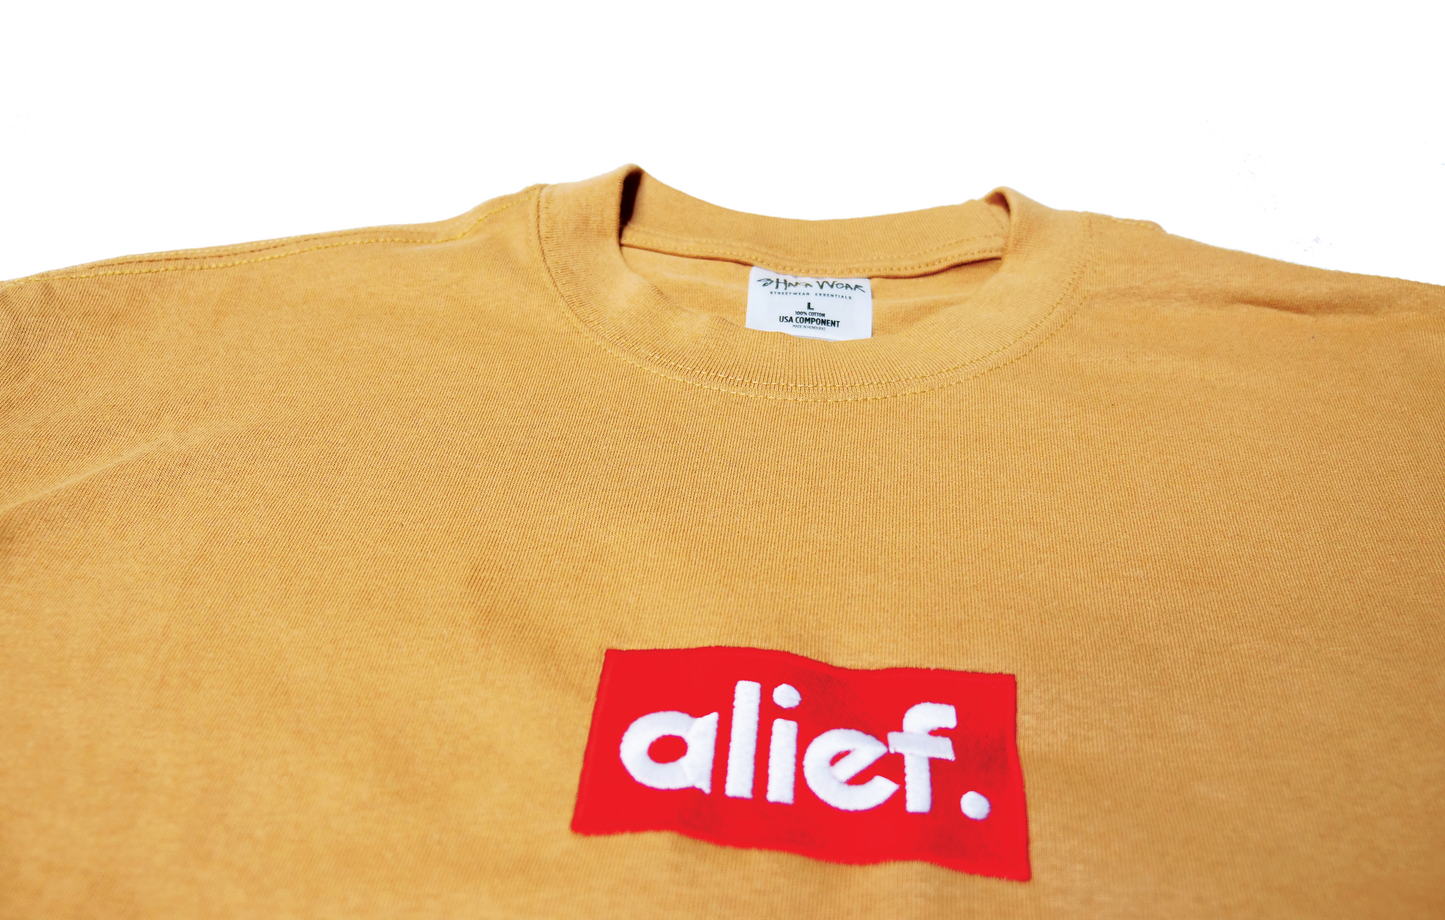 Alief You Weren’t There Tee - Tan/Red Box